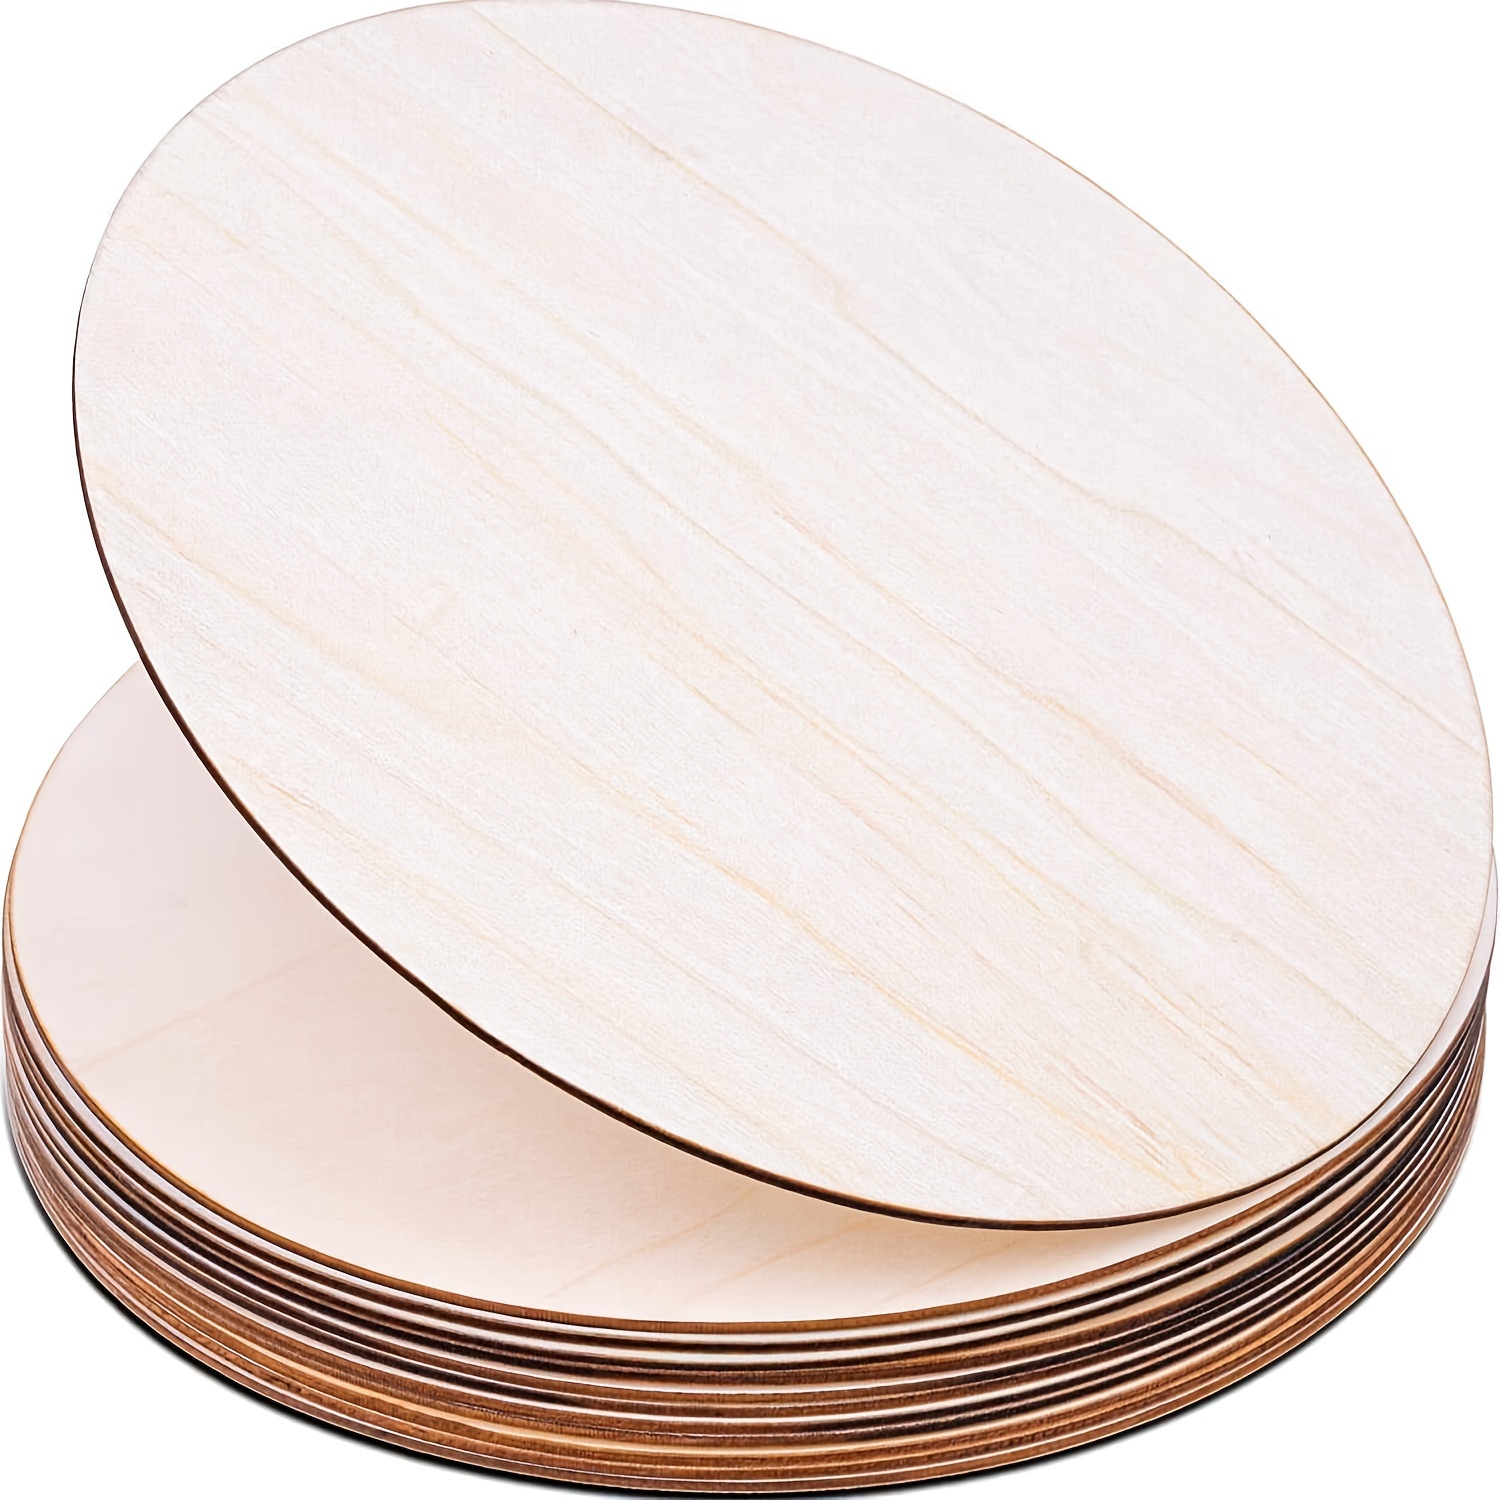 8 Pack Unfinished 12-Inch Wooden Rounds for Crafts, DIY Home